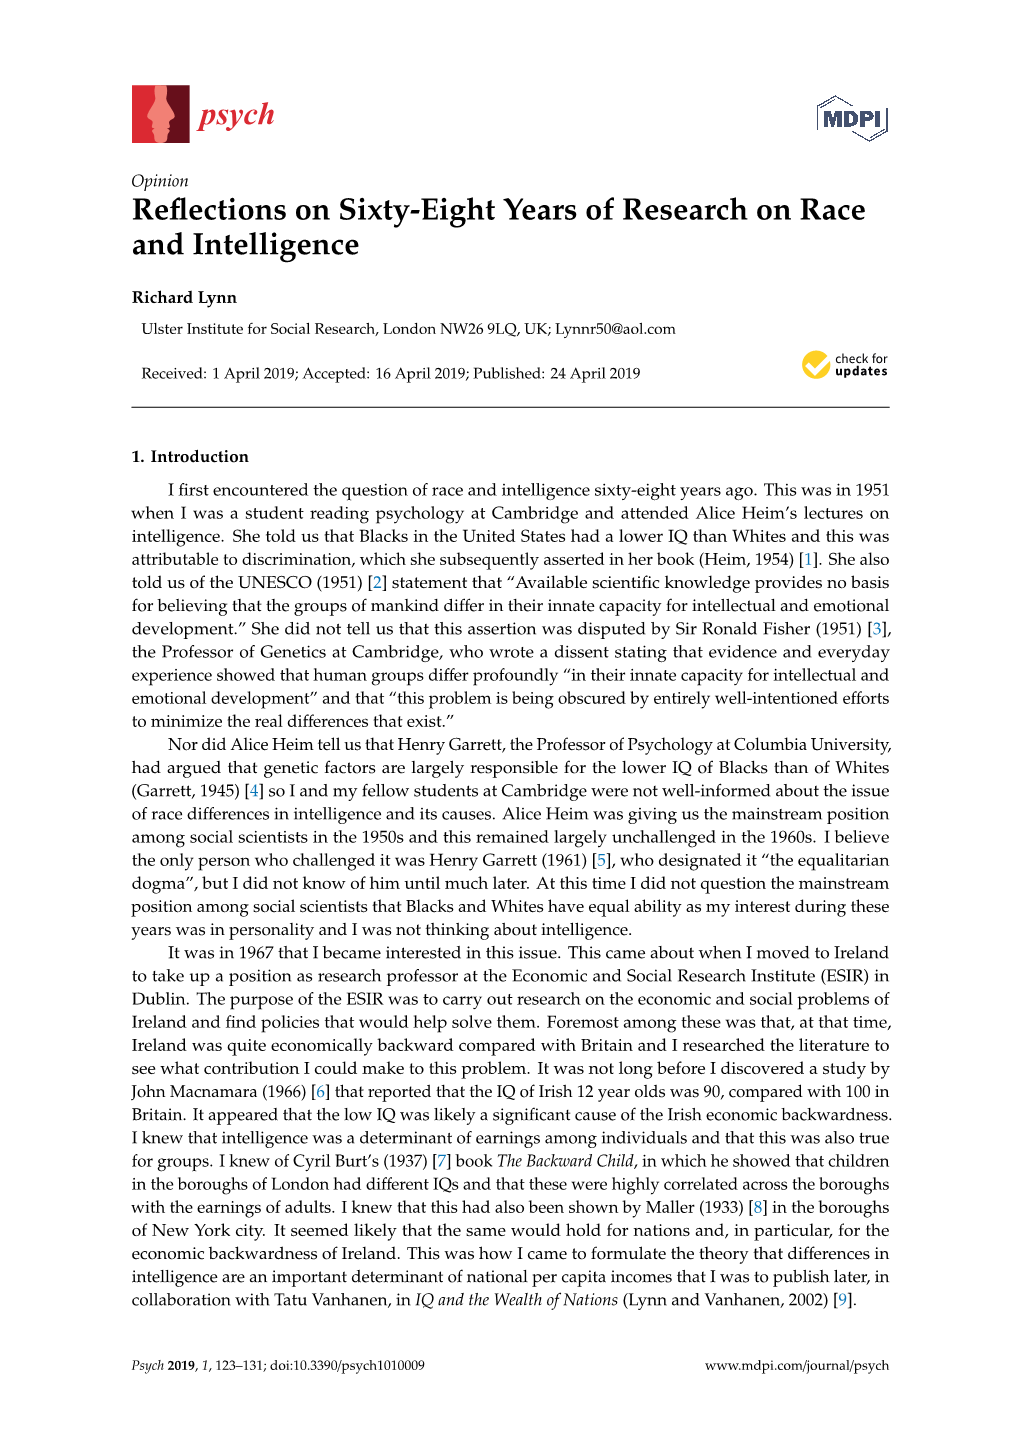 Reflections on Sixty-Eight Years of Research on Race and Intelligence